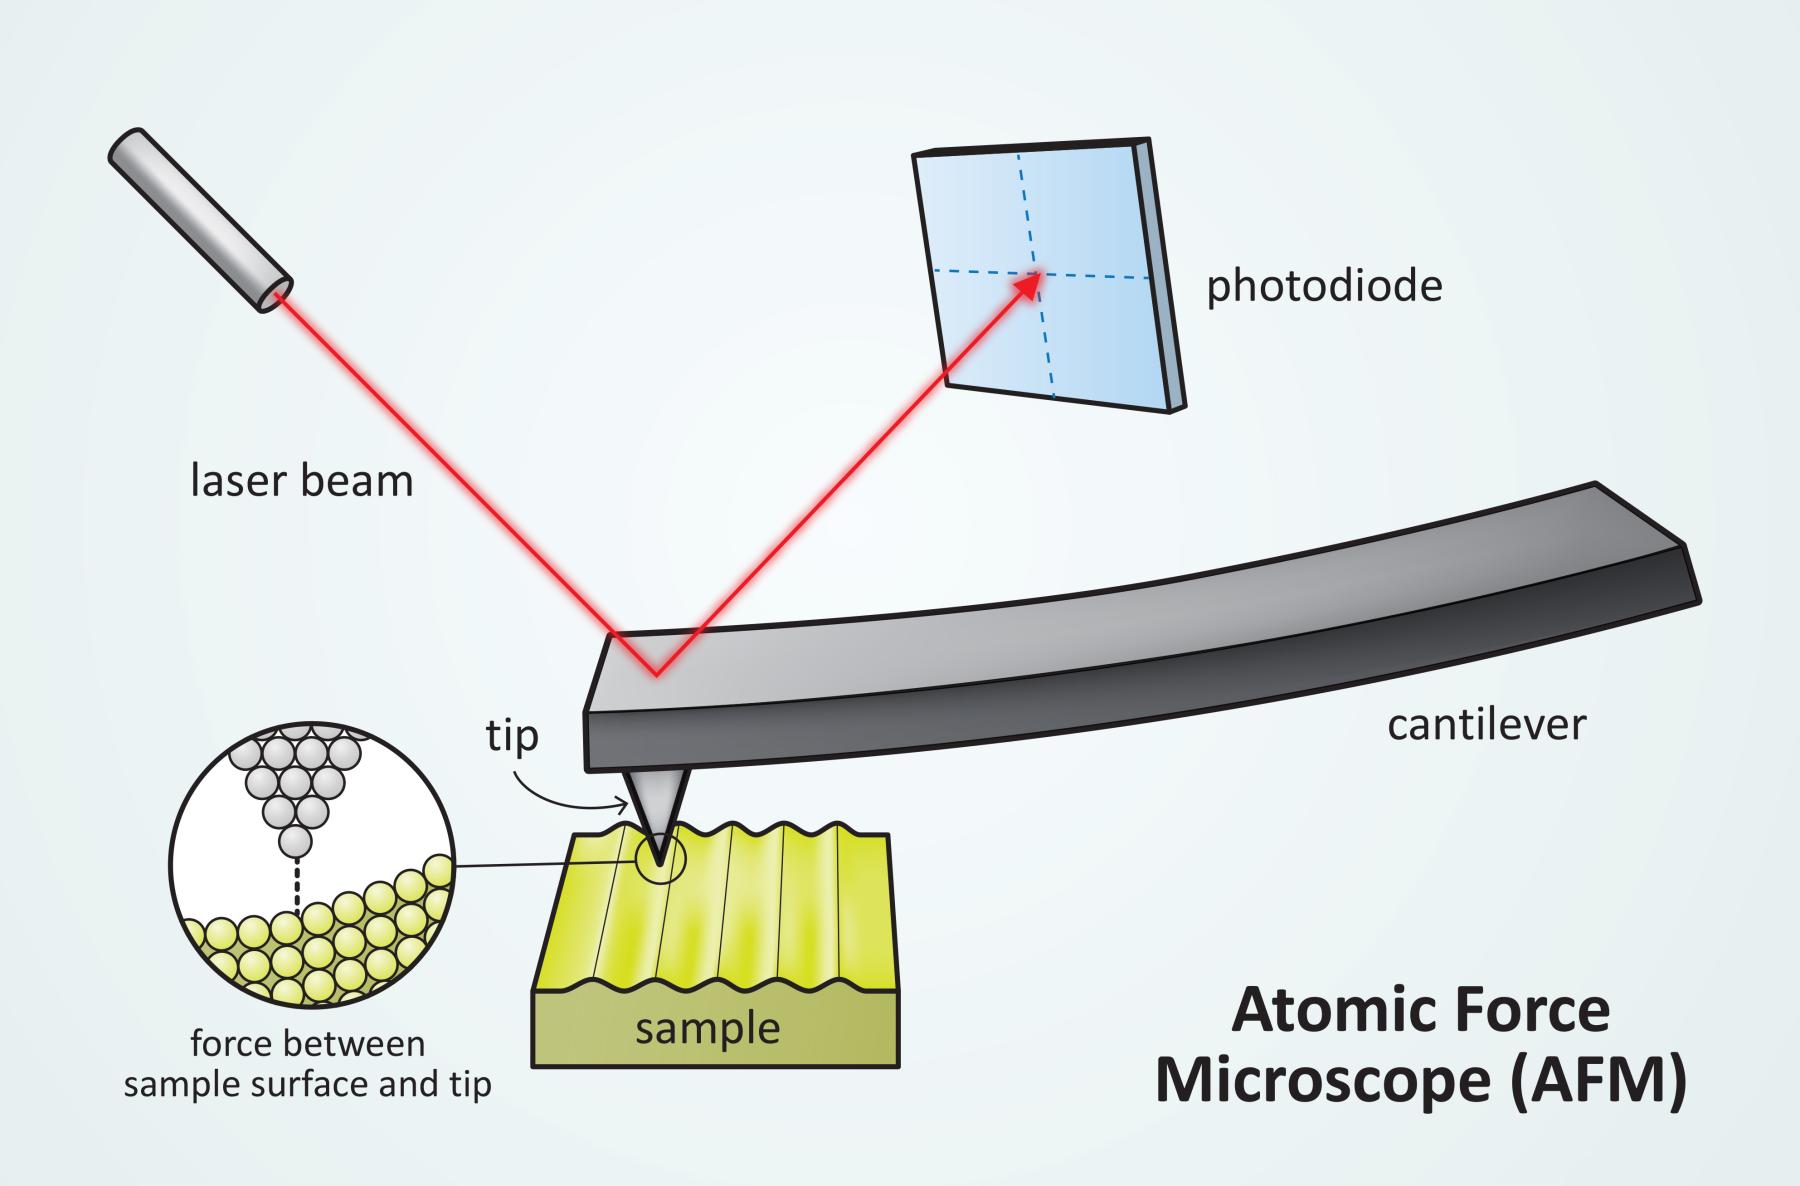 Illustration of an Atomic Force Microscope (AFM) probe tip